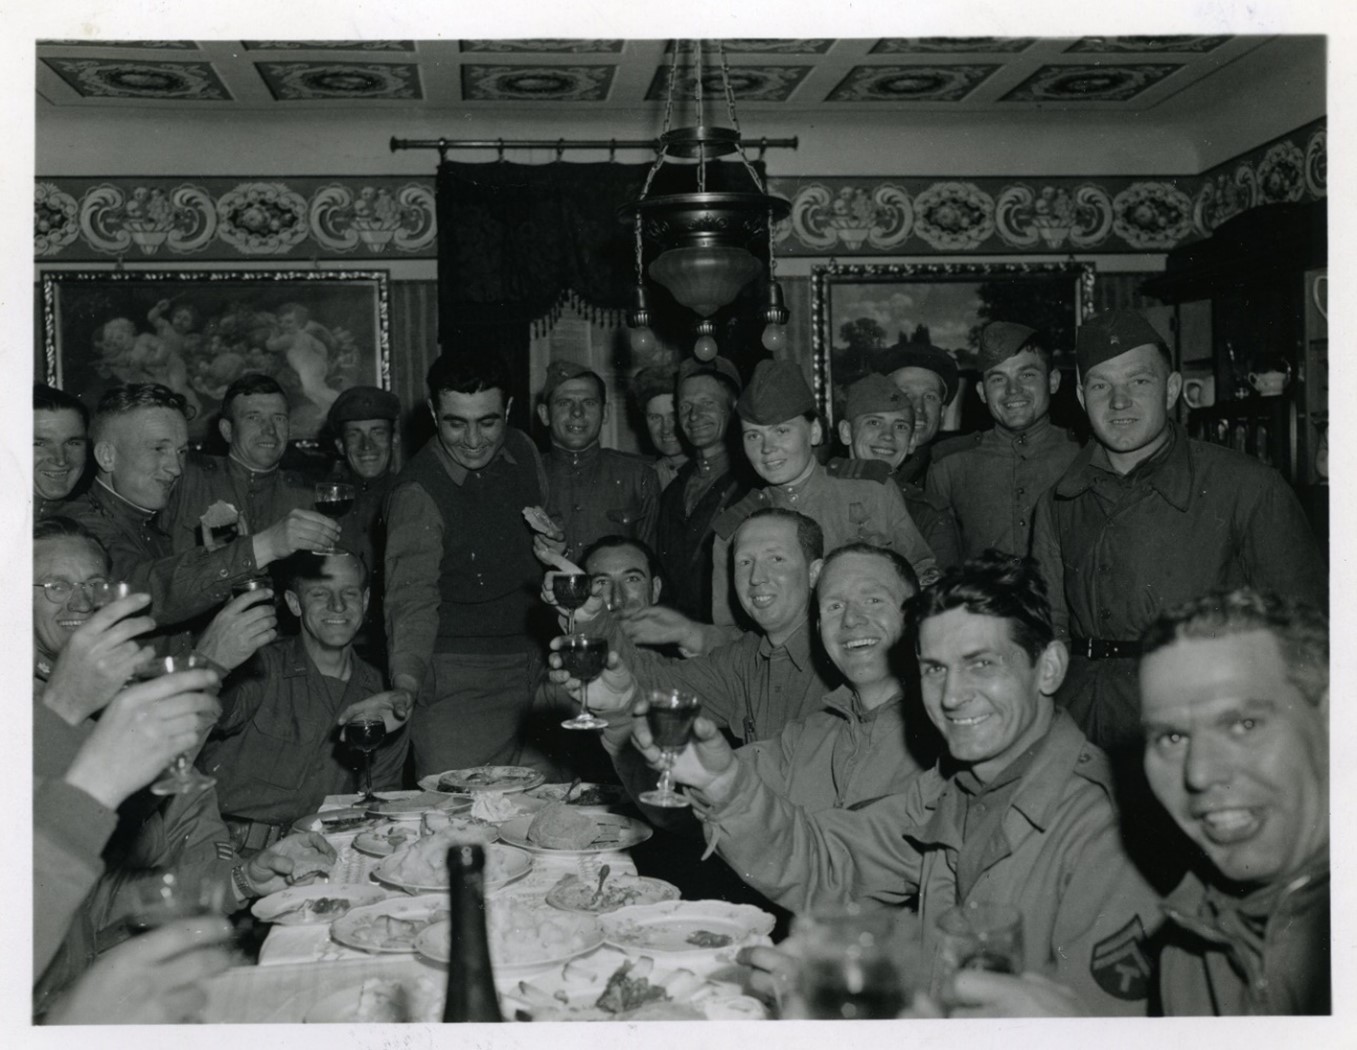 American and Soviet soldiers toast to victory in Europe, Torgau